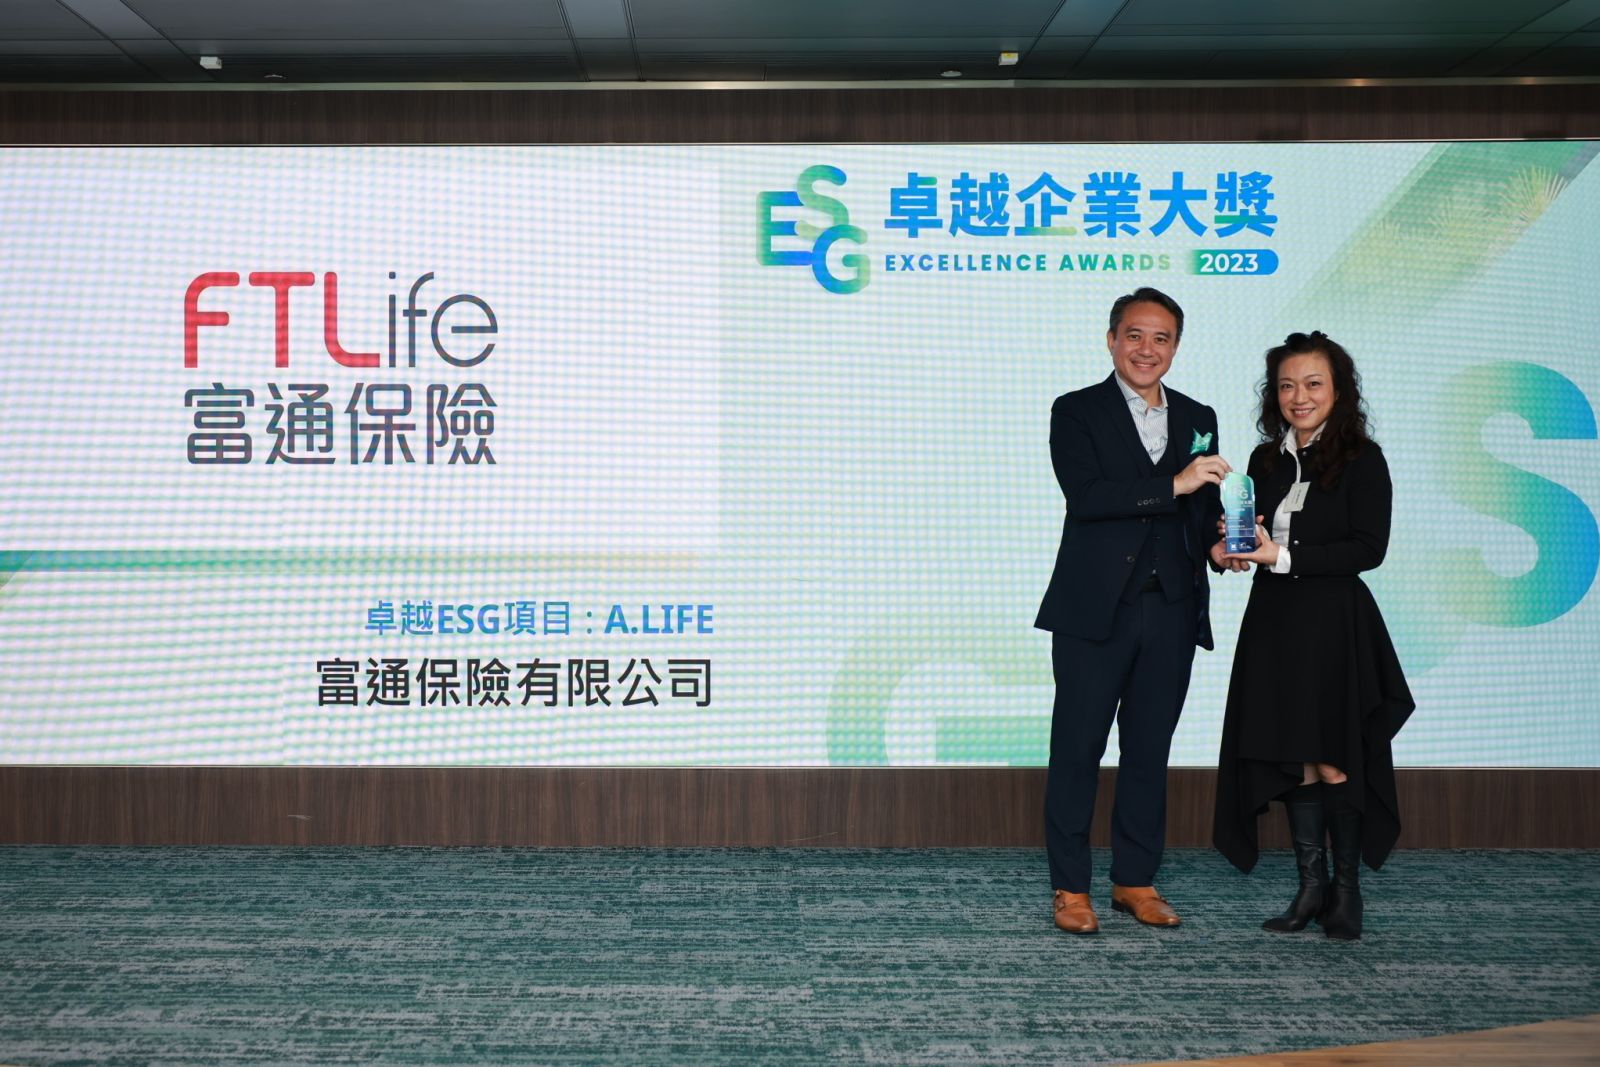 FTLife awarded “Caring Company“ logo for 21 consecutive years